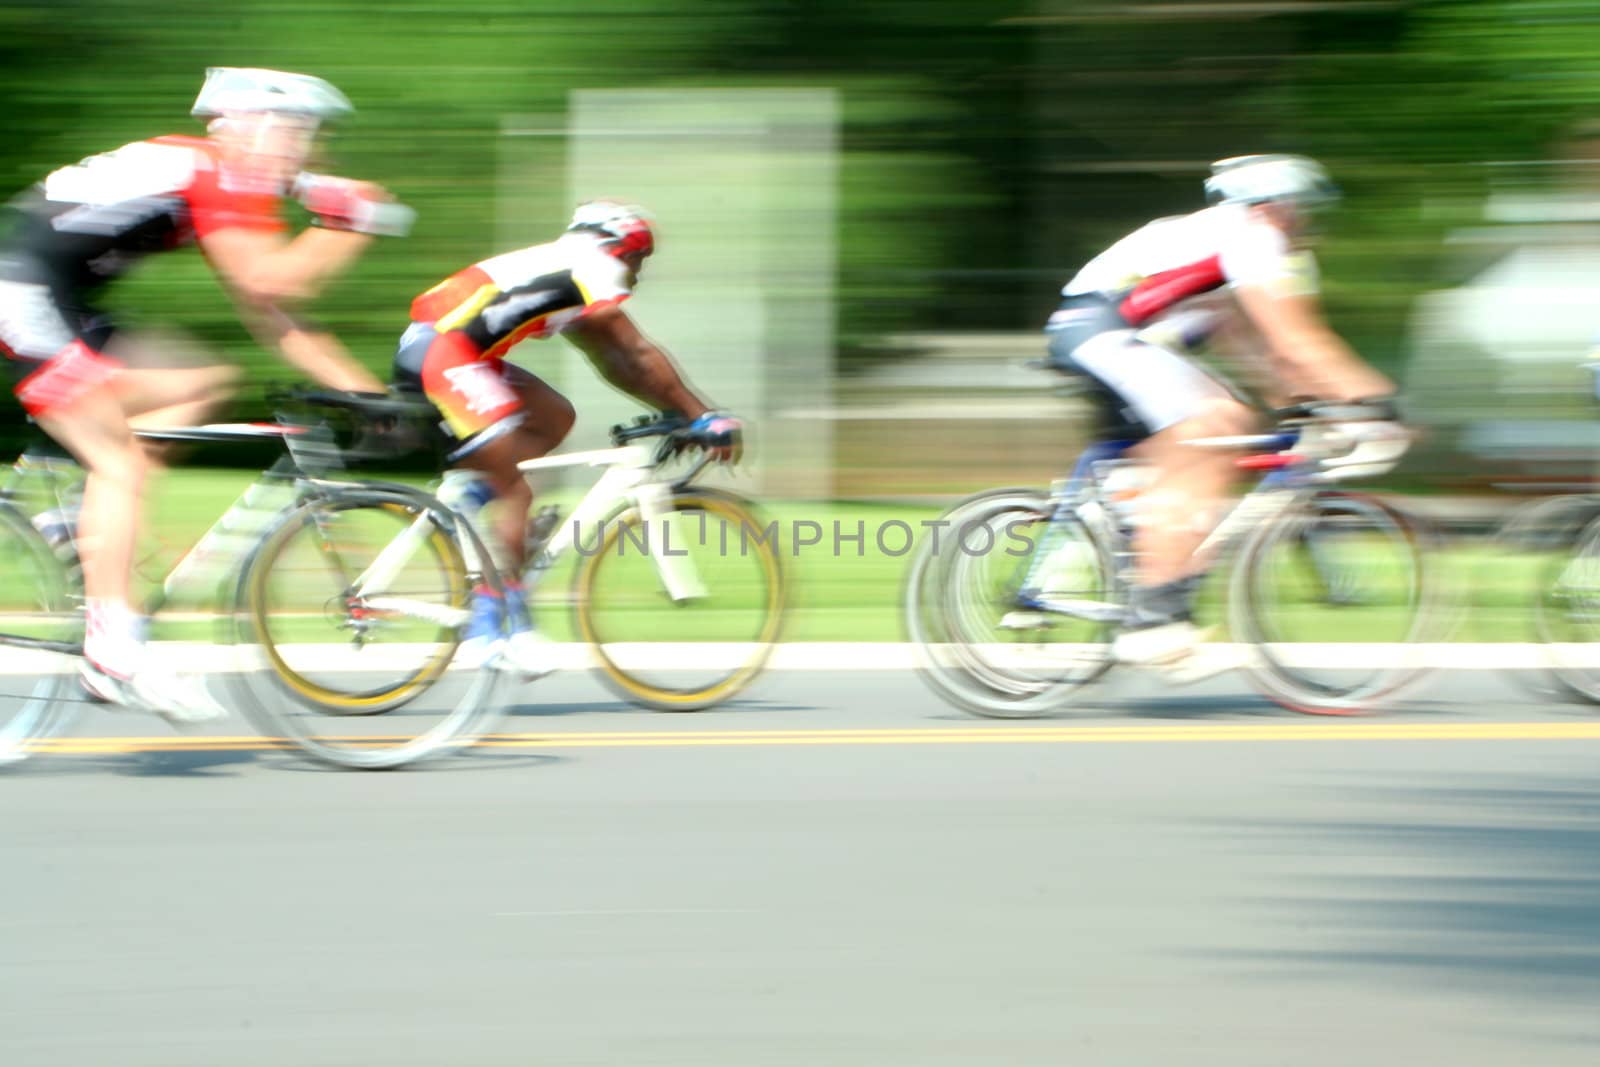 A Blurred motion bicycle race